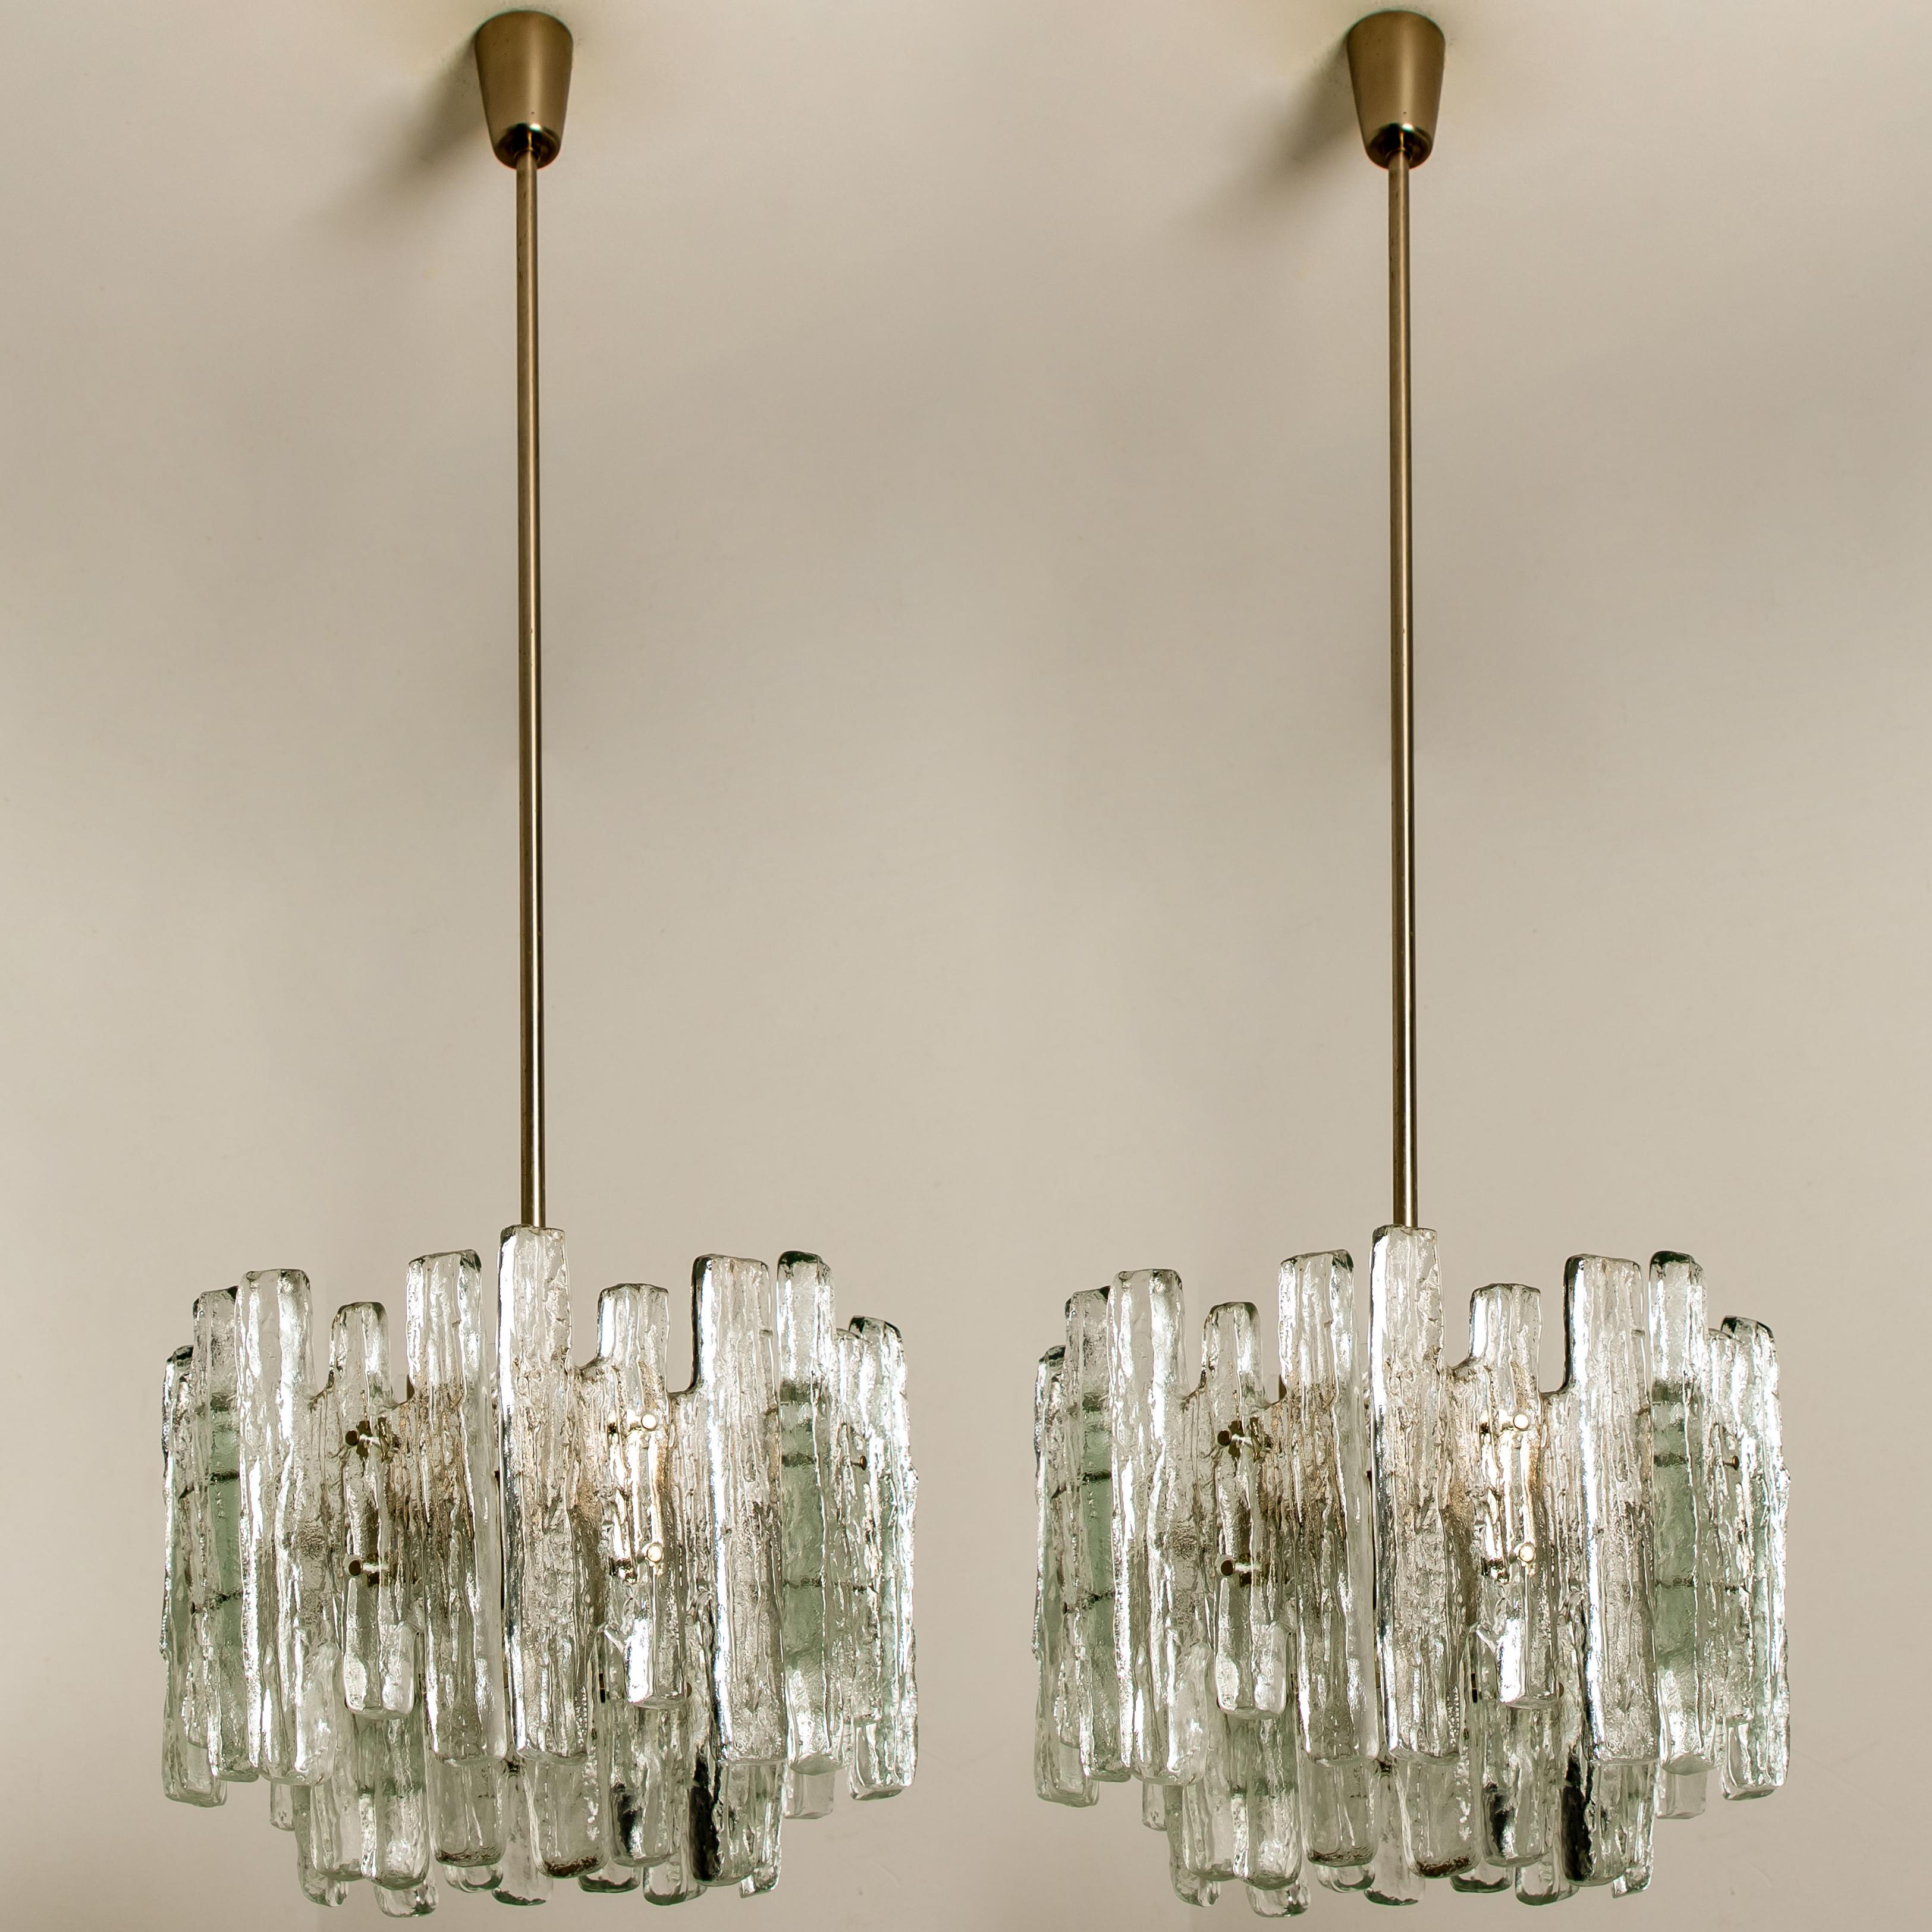 Pair of Large Modern Three-Tiered Chrome Ice Glass Chandeliers by J.T. Kalmar In Good Condition For Sale In Rijssen, NL